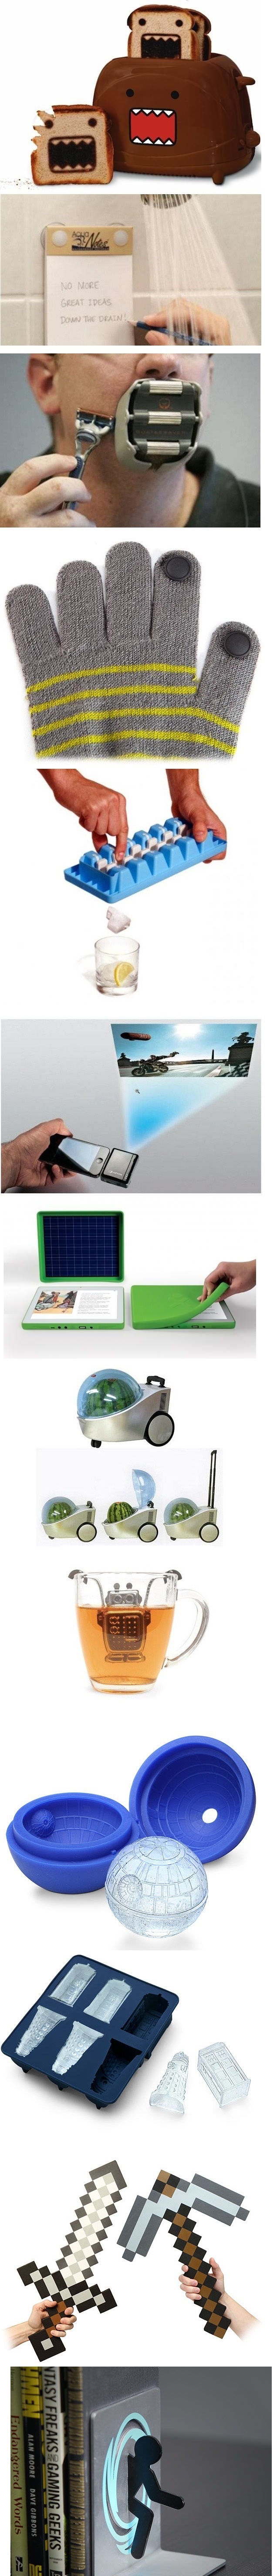 Awesome gadgets